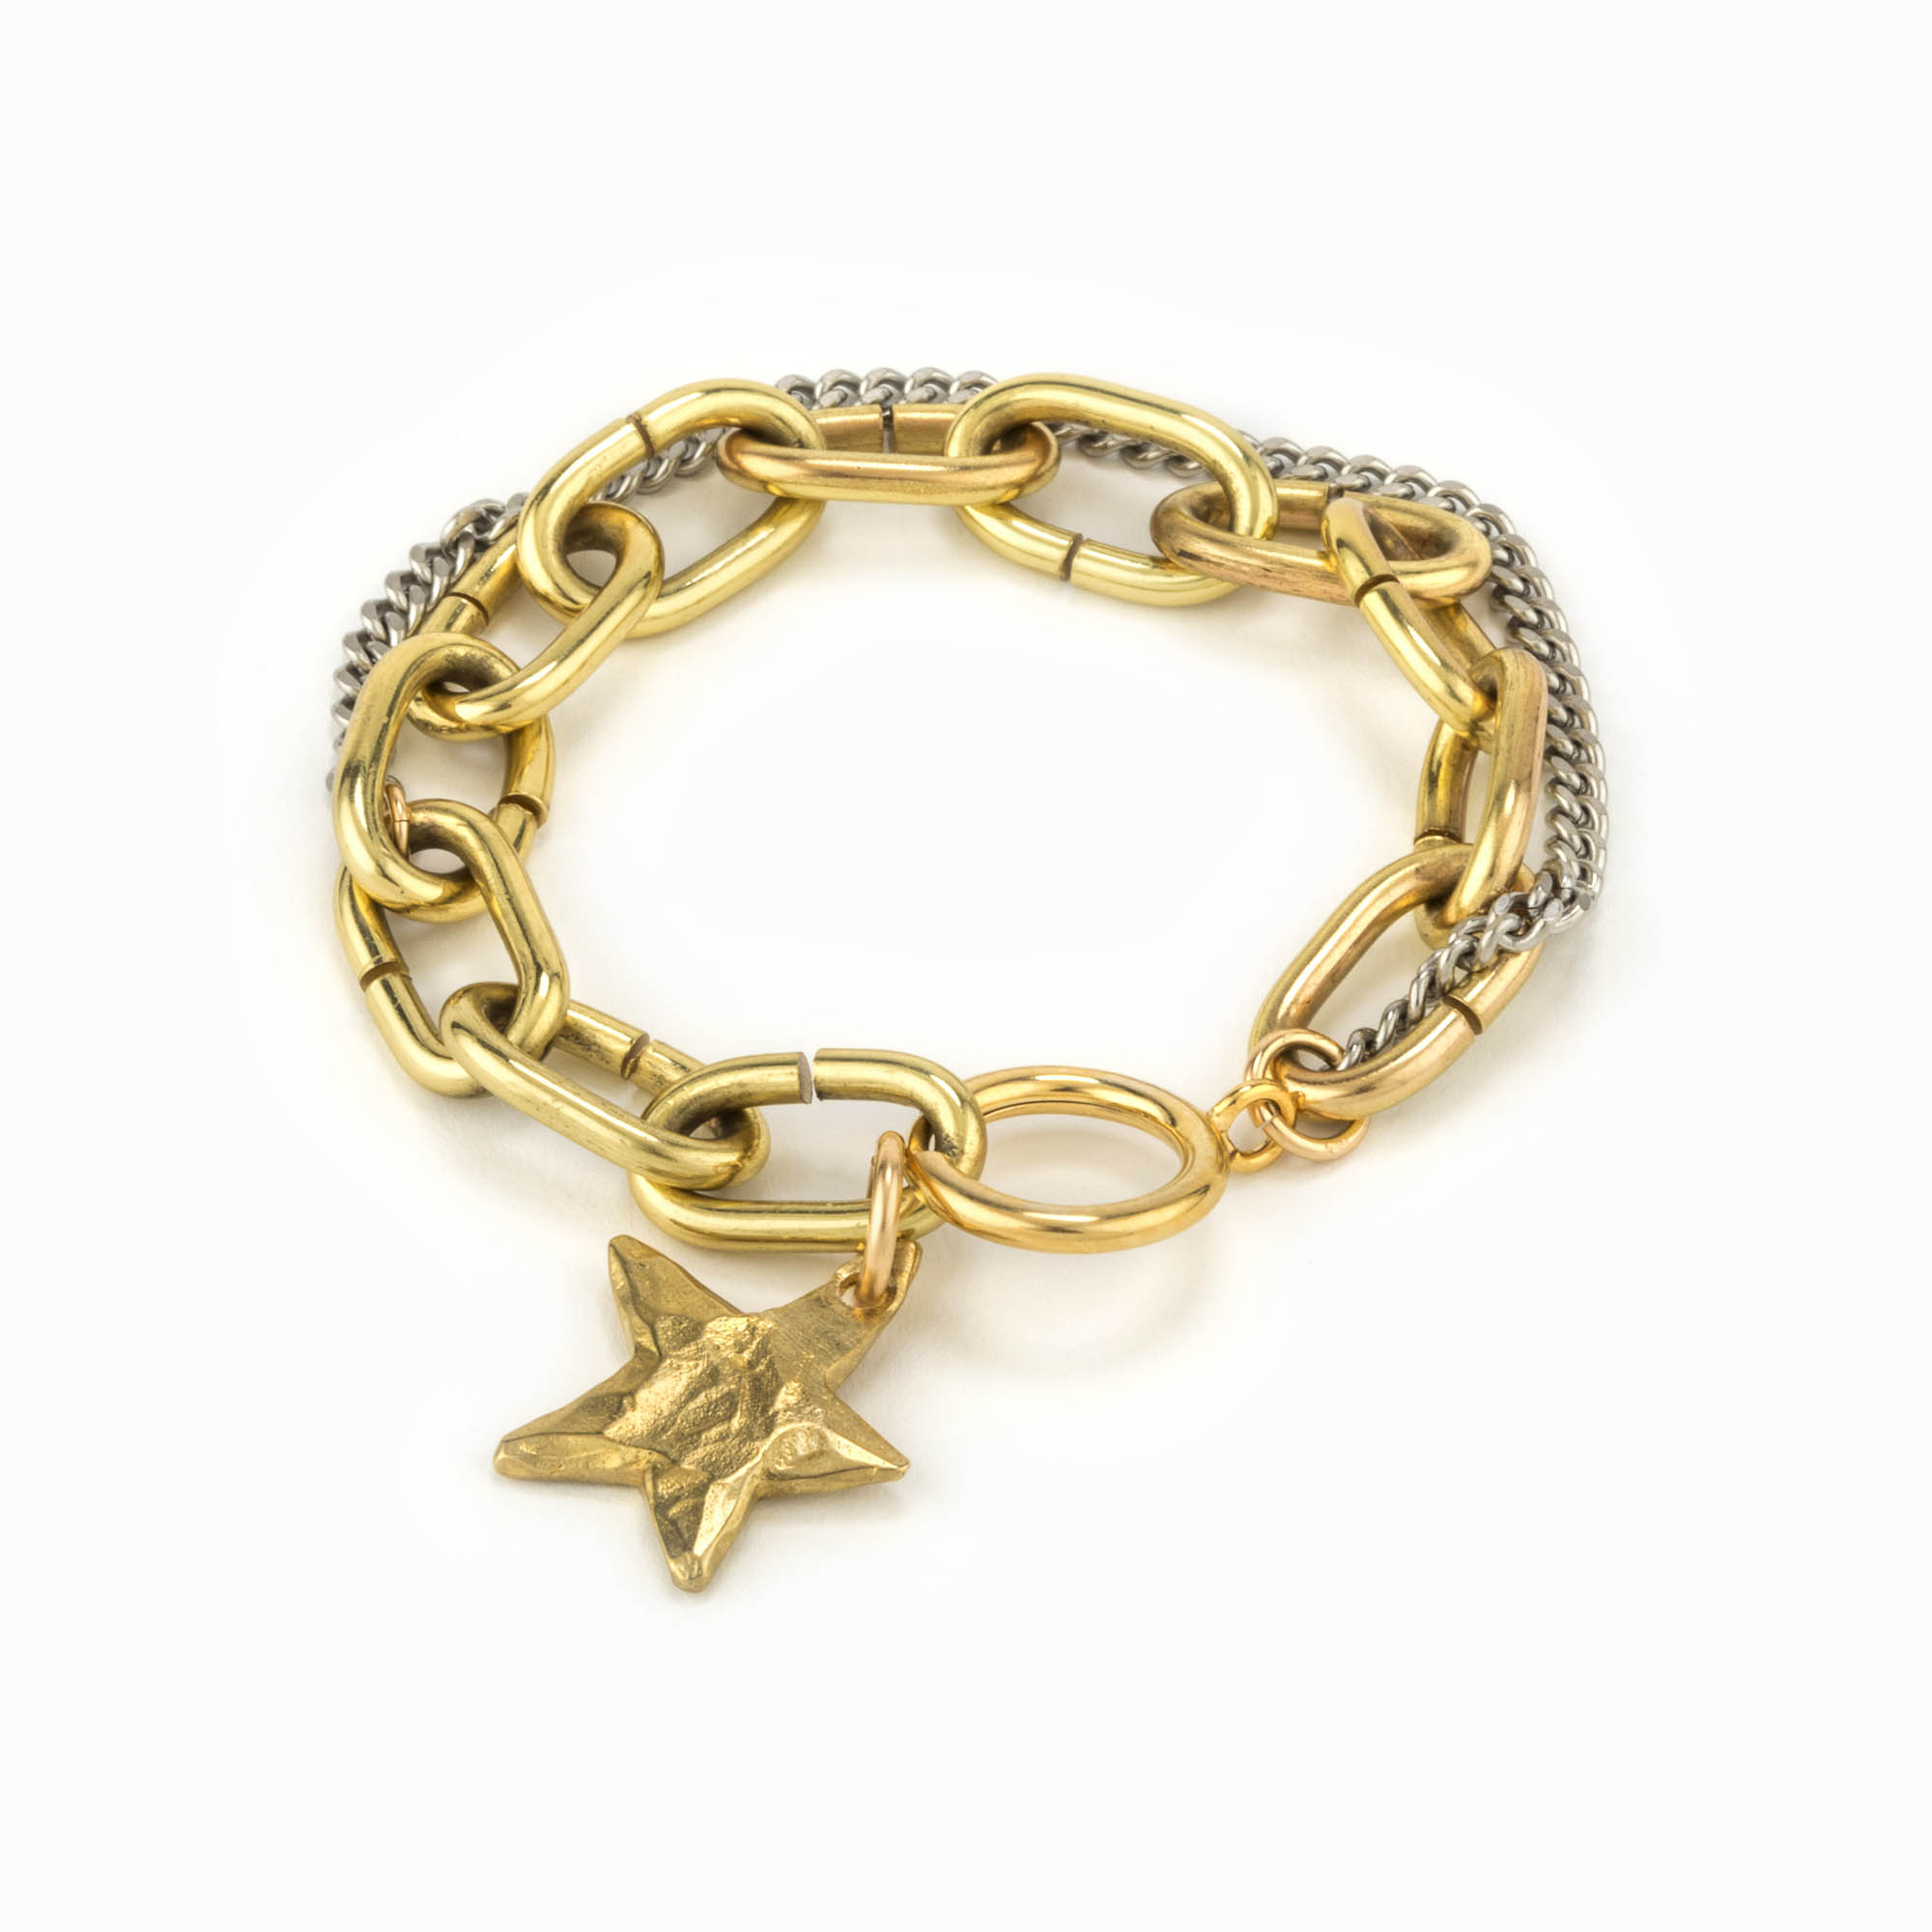 Featured image for “Sirius Brass Chain Bracelet”